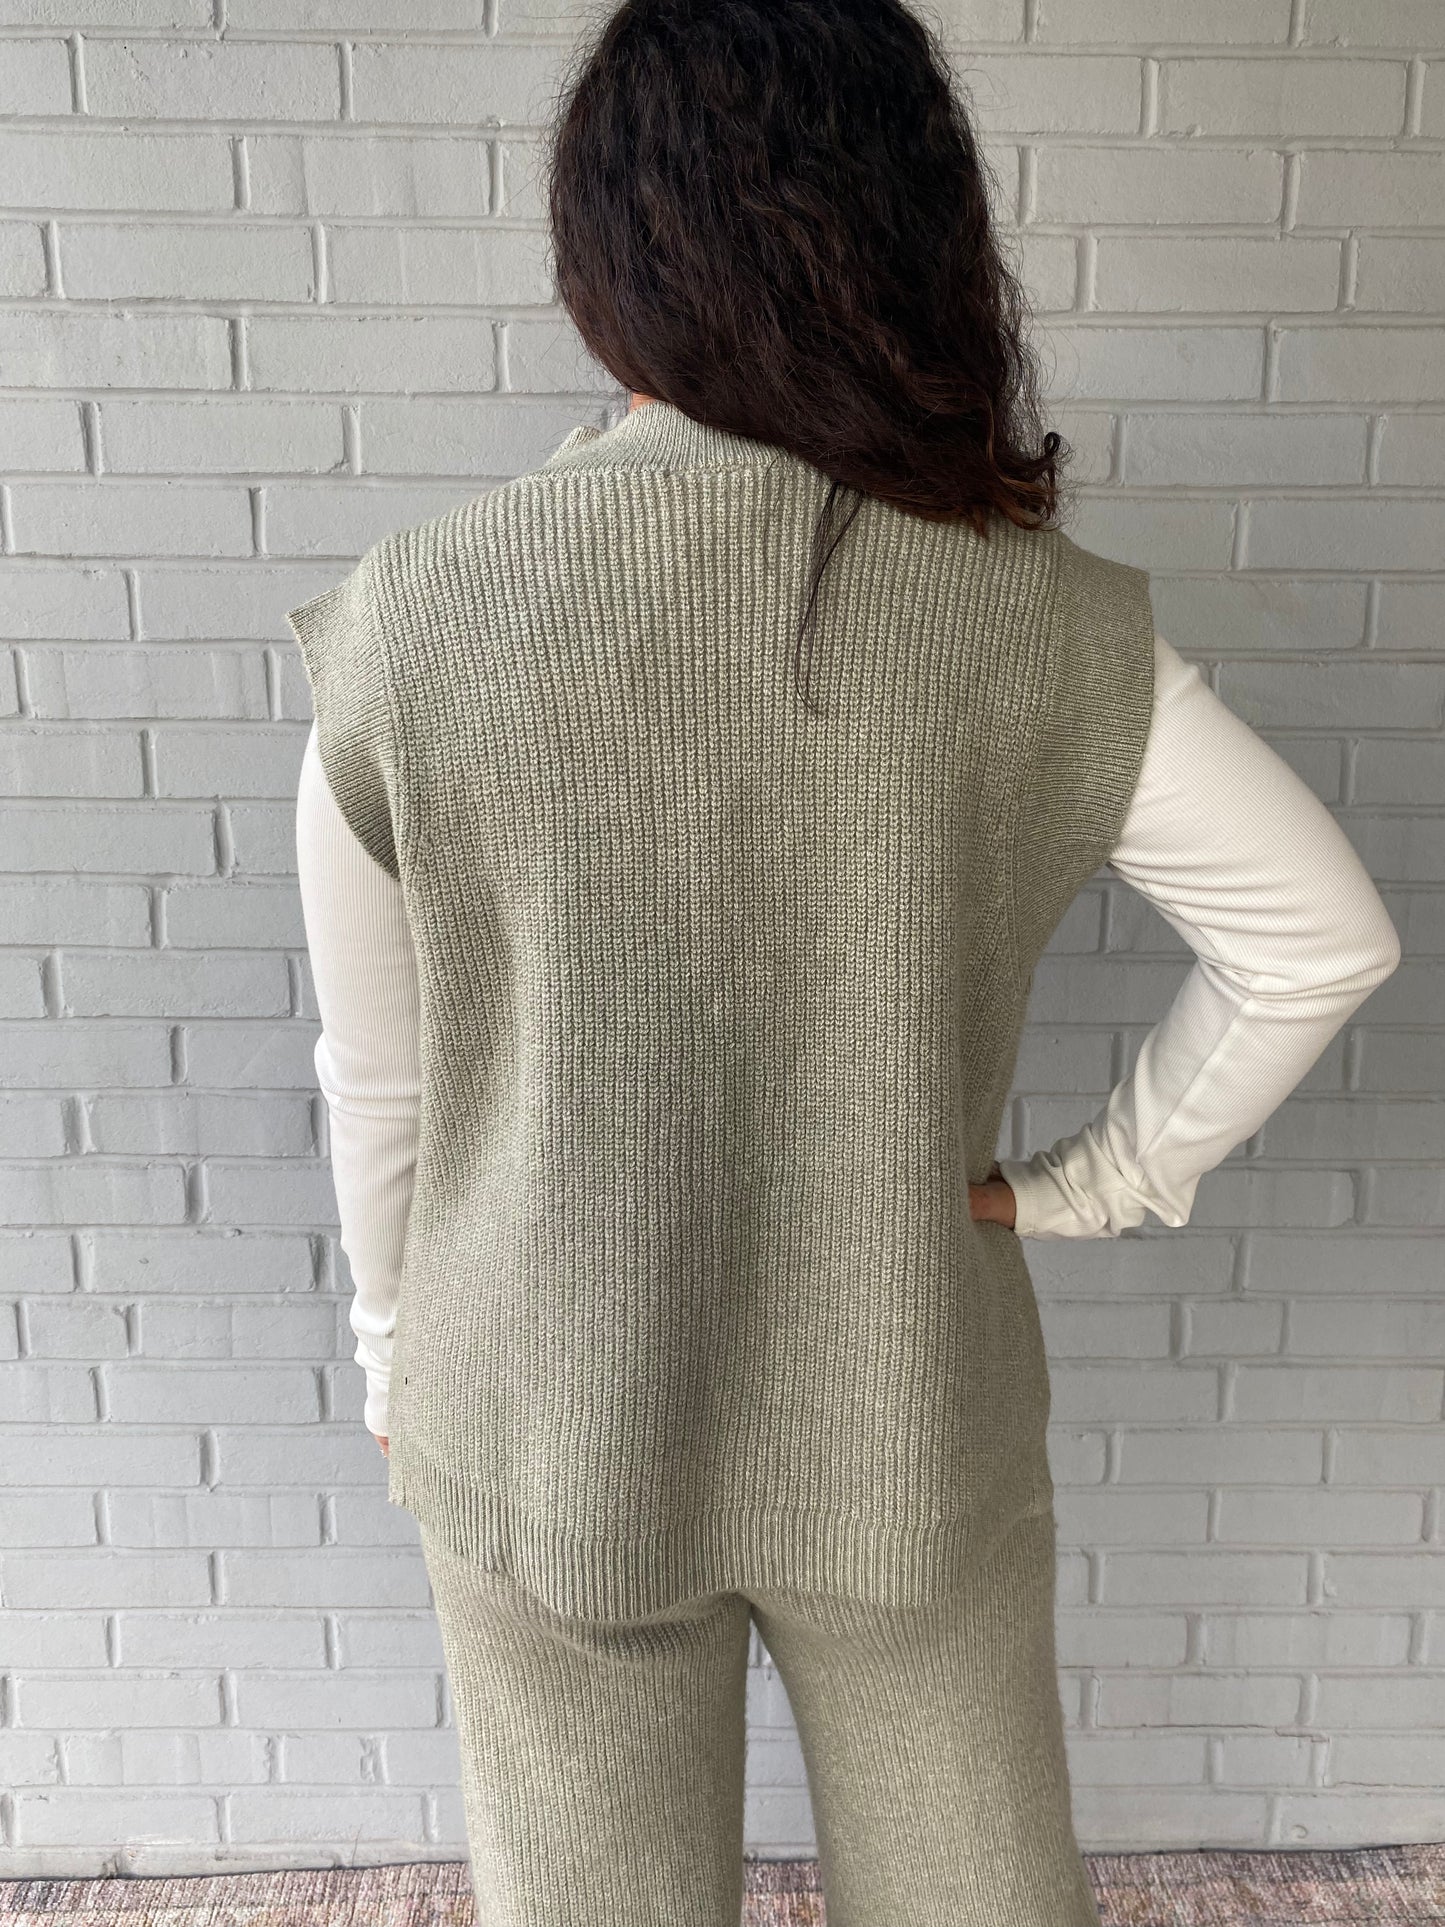 Olive You to Pieces Sweater Vest